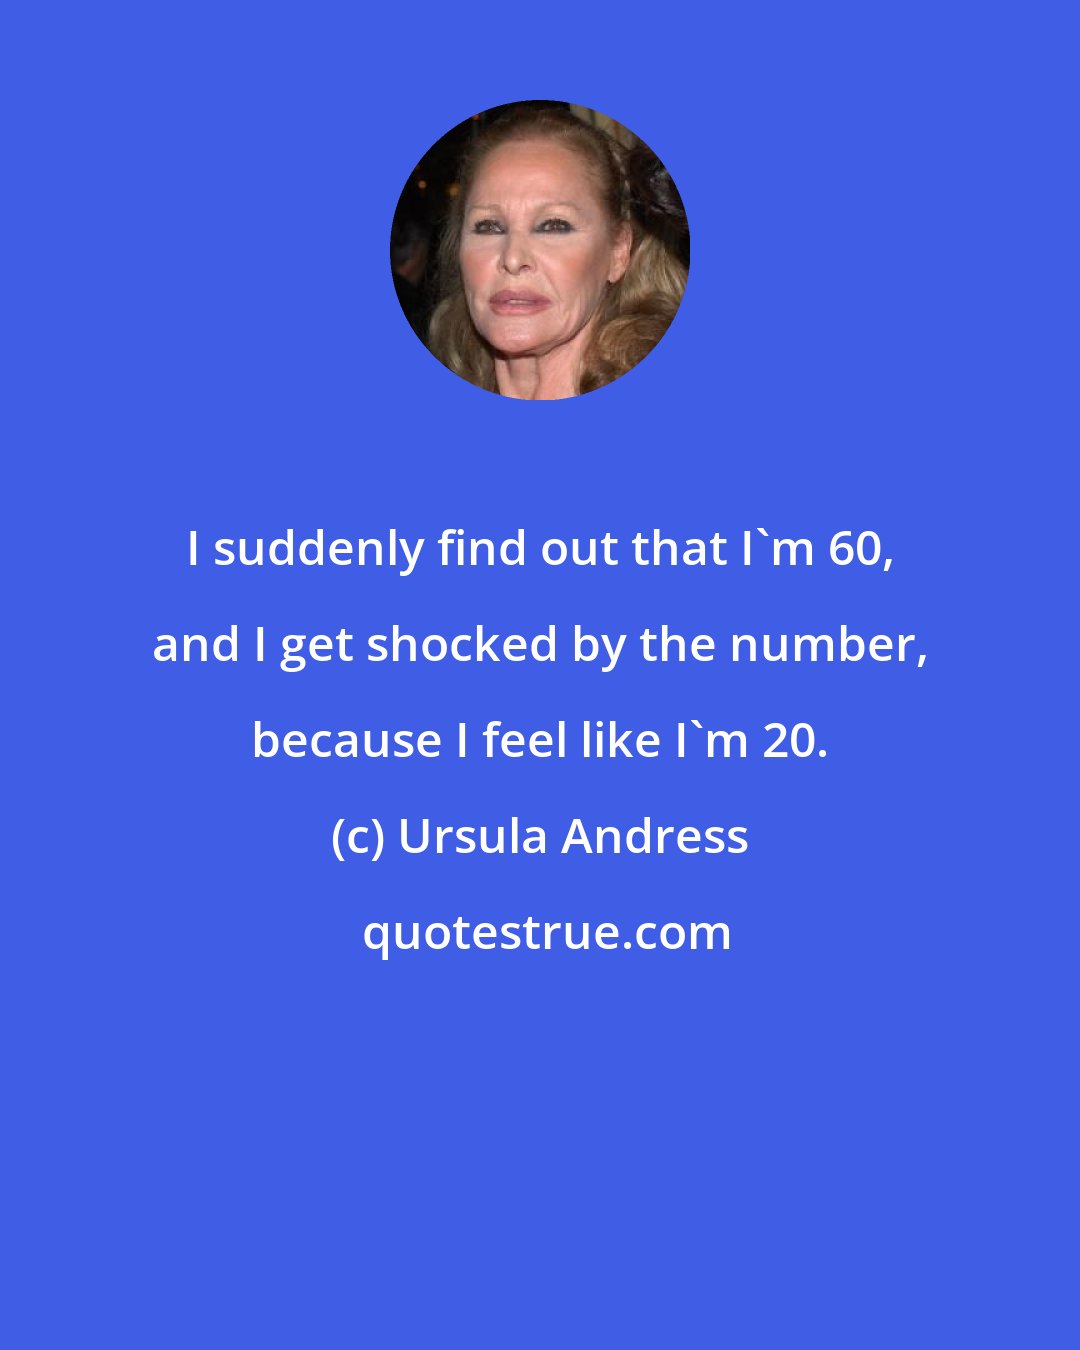 Ursula Andress: I suddenly find out that I'm 60, and I get shocked by the number, because I feel like I'm 20.